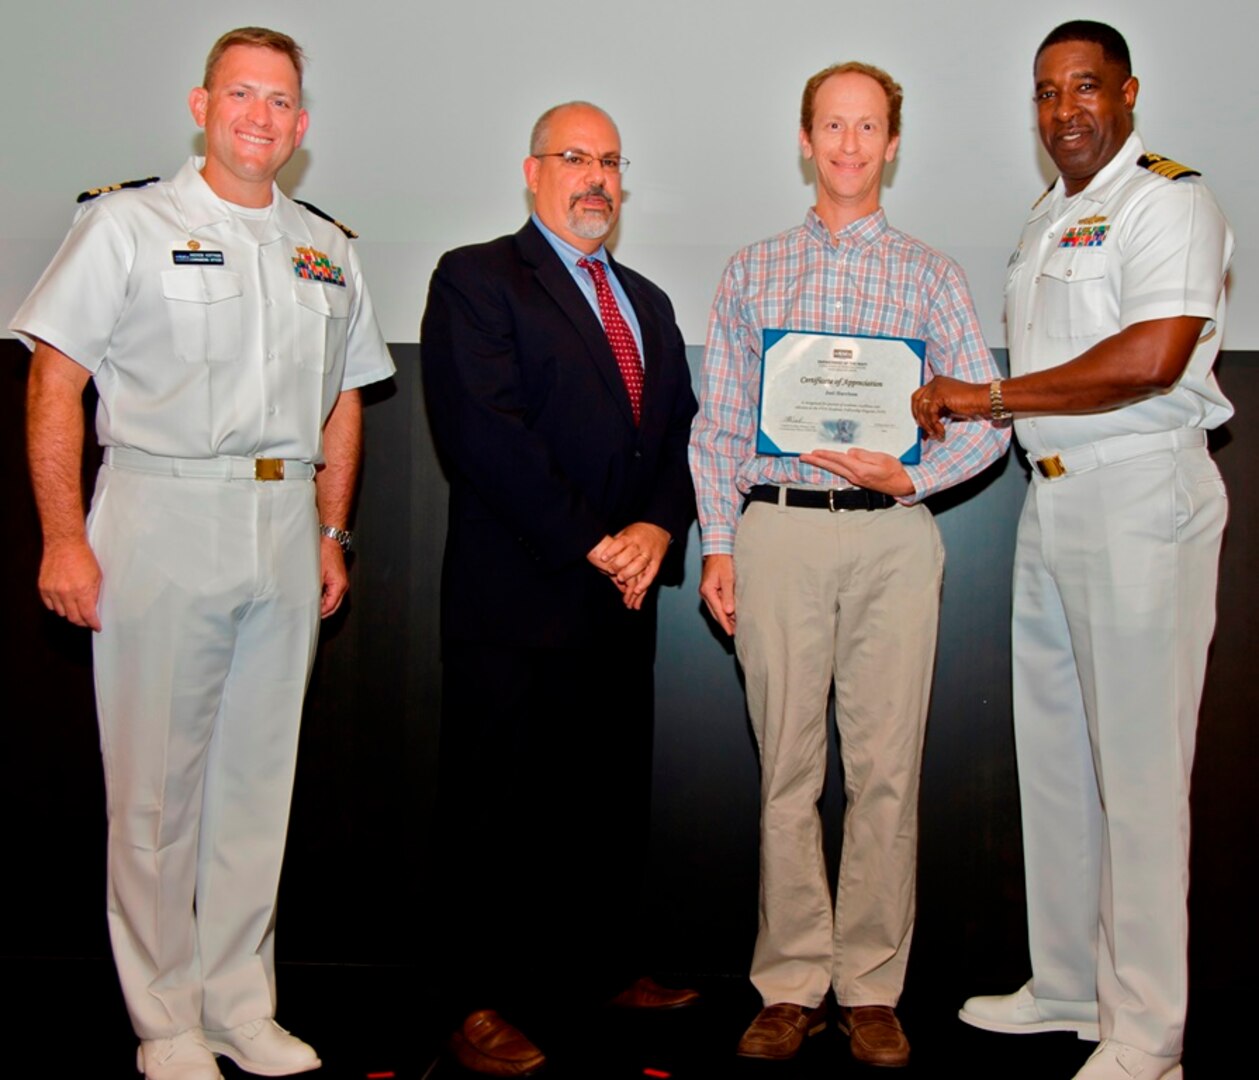 IMAGE: DAHLGREN, Va. - Joel Harrison receives his certificate of achievement from Naval Surface Warfare Center Dahlgren Division (NSWCDD) Technical Director John Fiore, NSWCDD Commanding Officer Capt. Godfrey 'Gus' Weekes, right, and Combat Direction Systems Activity Dam Neck Commanding Officer Cmdr. Andrew Hoffman at the 2017 NSWCDD academic awards ceremony. Harrison was recognized for completing his doctoral degree in electrical engineering from the University of Virginia, and commended for his commitment to personal and professional development.